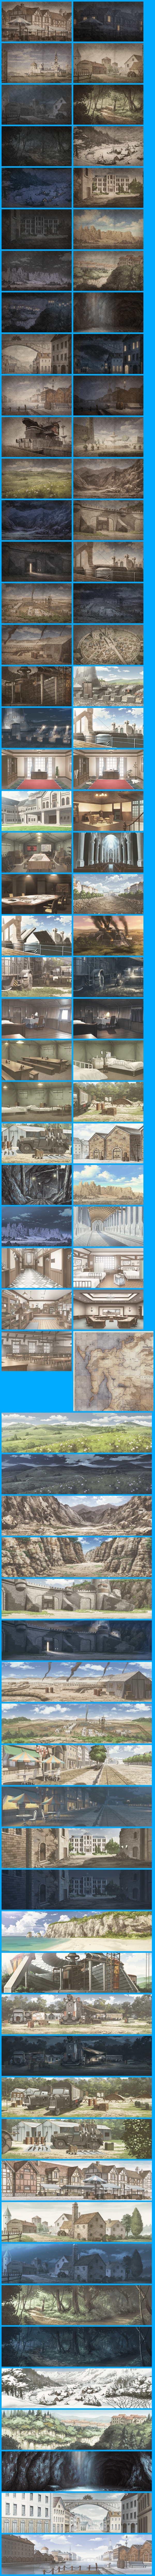 Valkyria Chronicles 3: Unrecorded Chronicles - Backgrounds